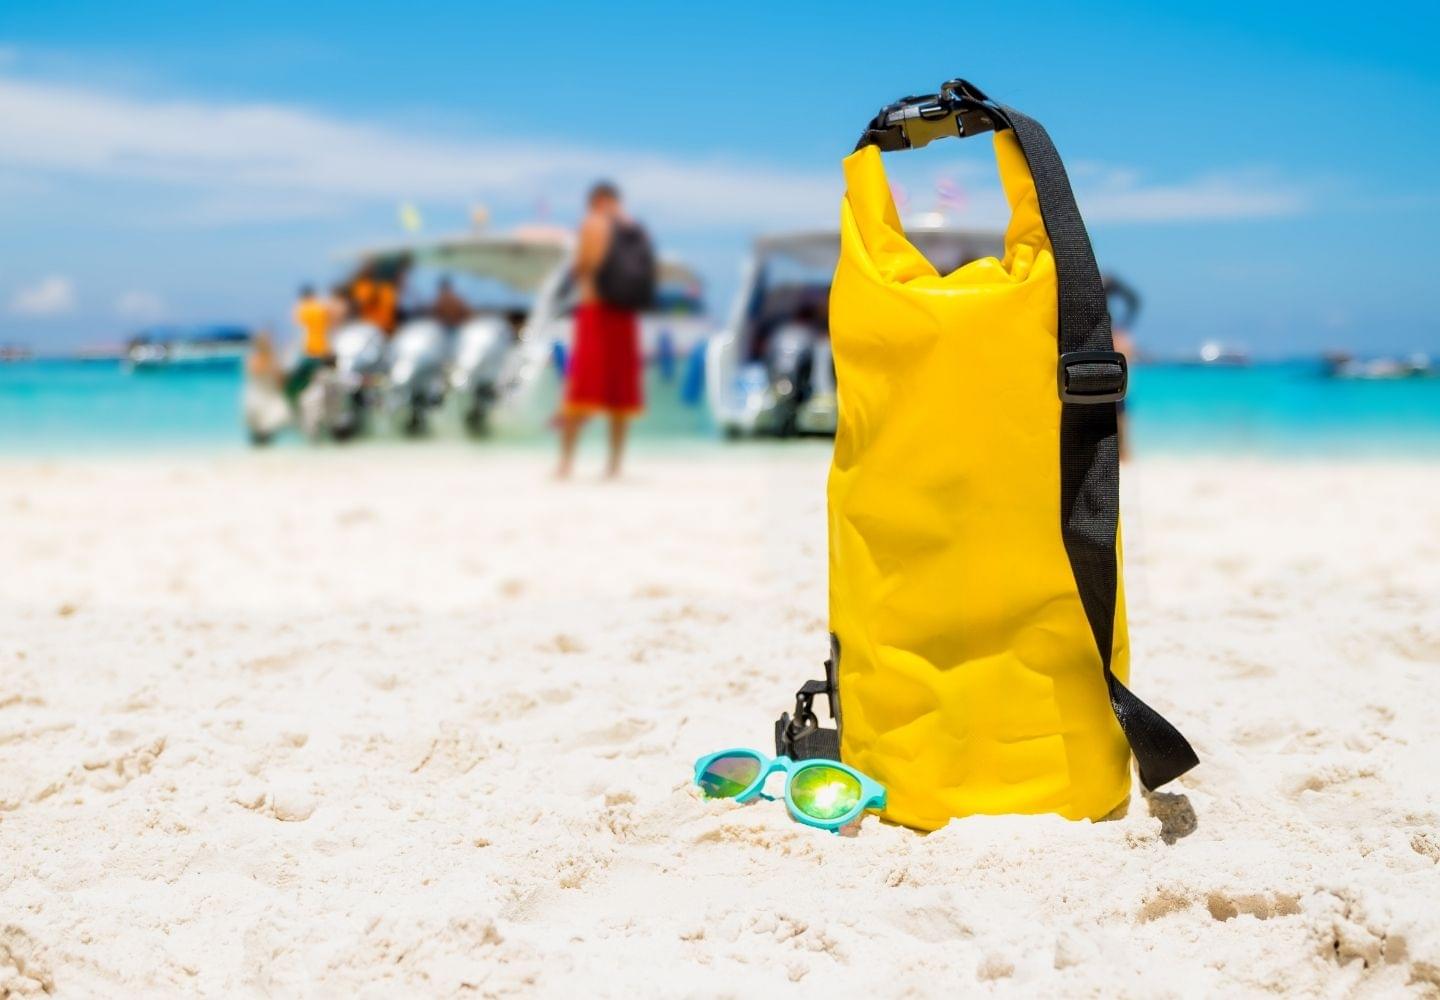 Best waterproof bag for snorkeling: Our picks to protect your valuables